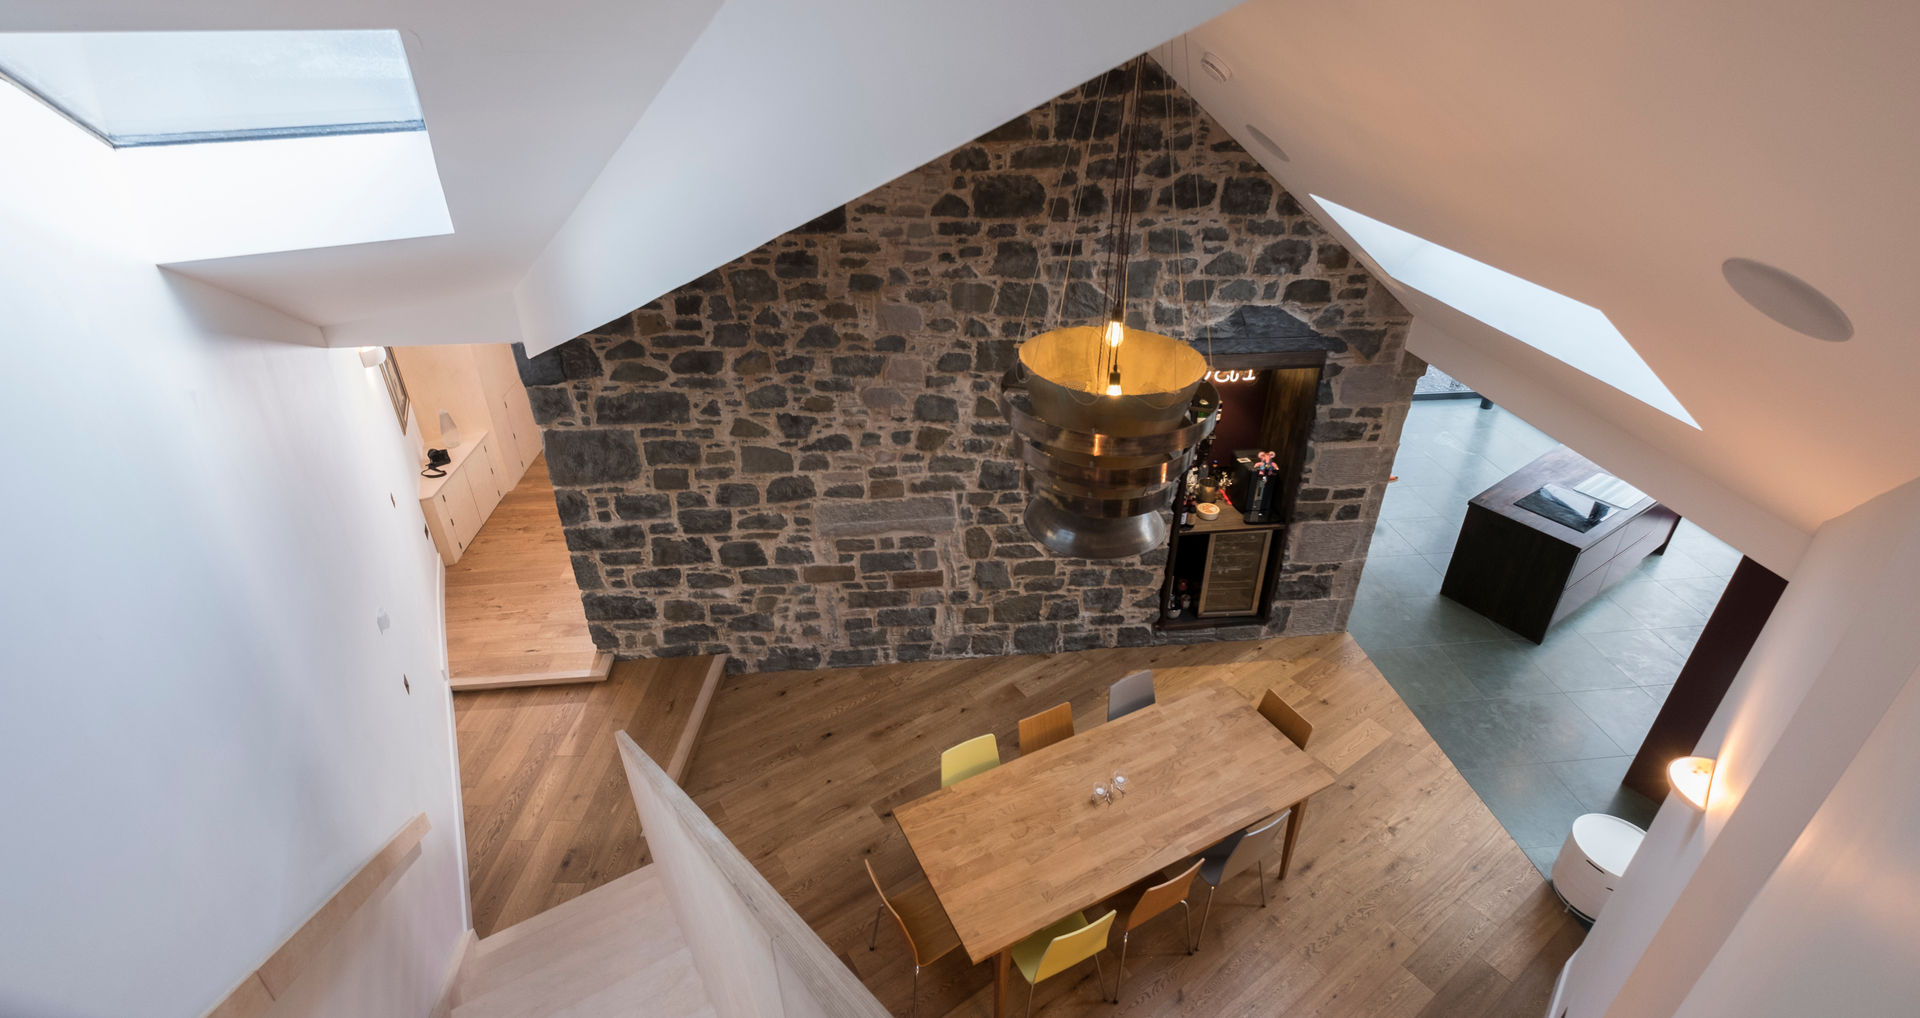 View from staircase over the dining room Woodside Parker Kirk Architects Salle à manger moderne Pierre Rooflight,Bespoke,Staircase,Plywood,Reclaimed,Lighting,Dining room,Stone wall,Original features,wood flooring